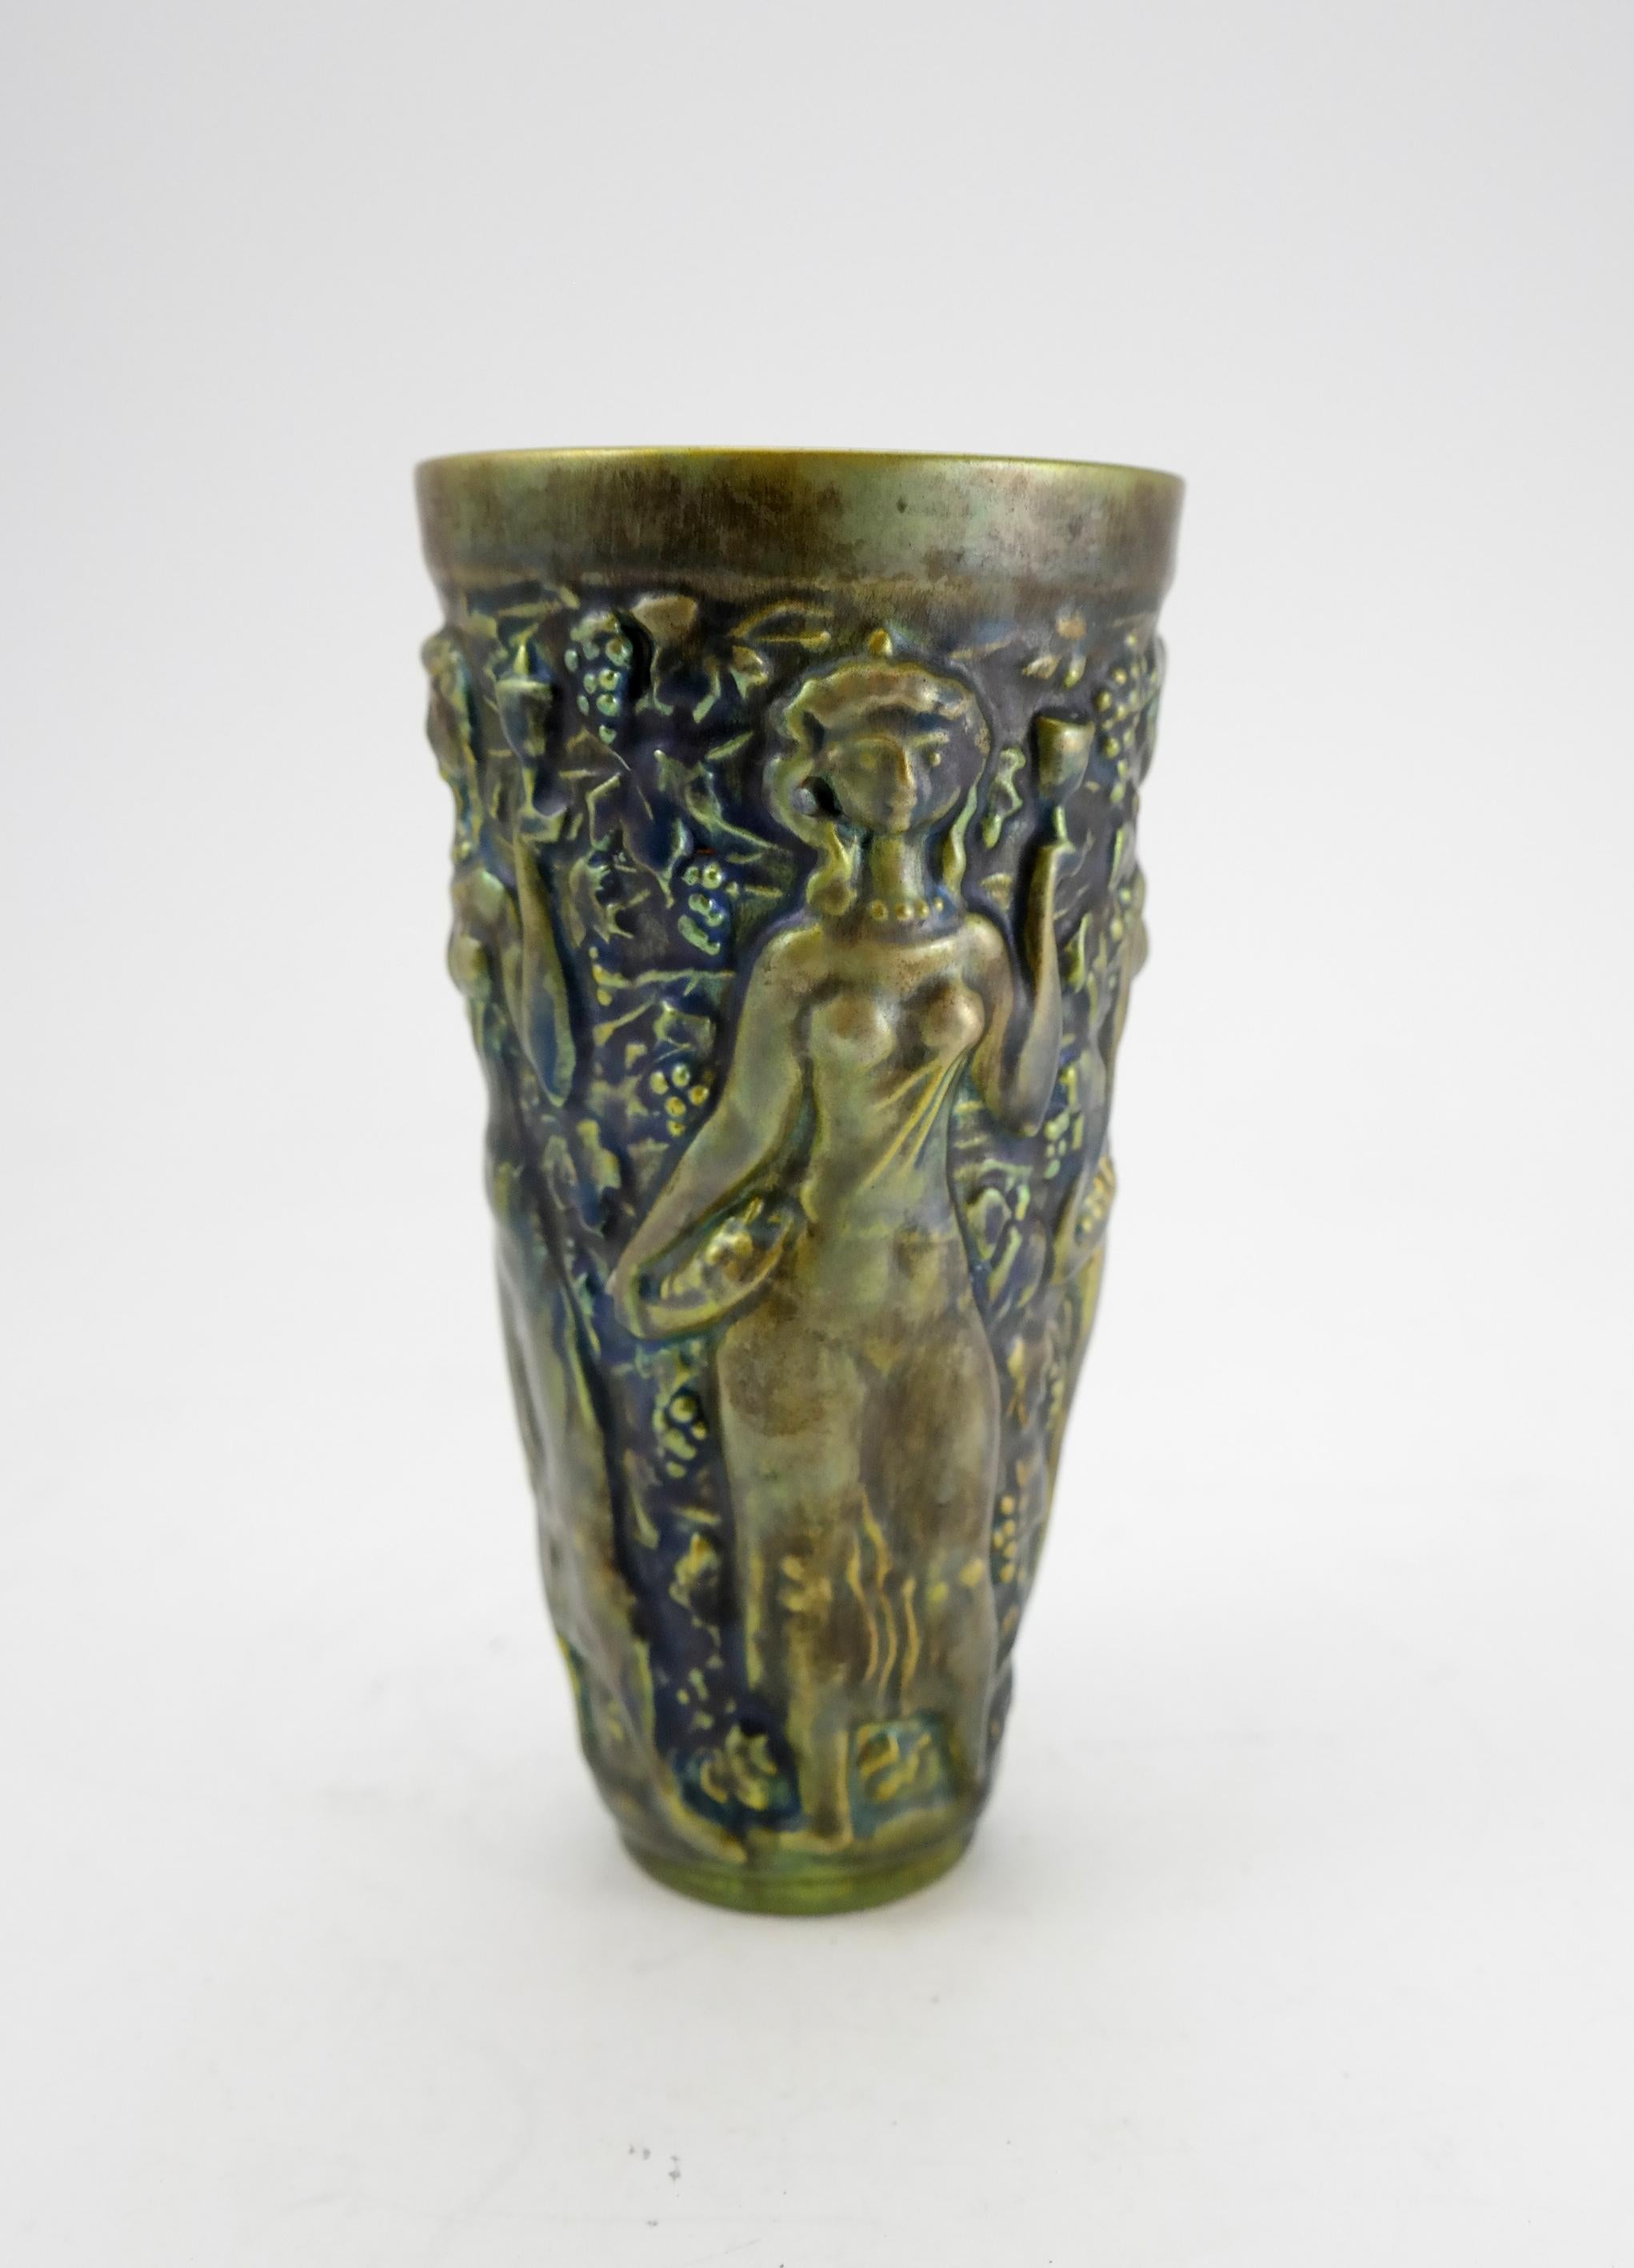 Art Nouveau iridescent eosin glazed ceramic vase by Zsolnay, 1910s

Zsolnay is the only ceramic company that uses this unique green or yellow glaze, originating from the Art Nouveau area. Zsolnay pieces are highly collectible.
The history of the